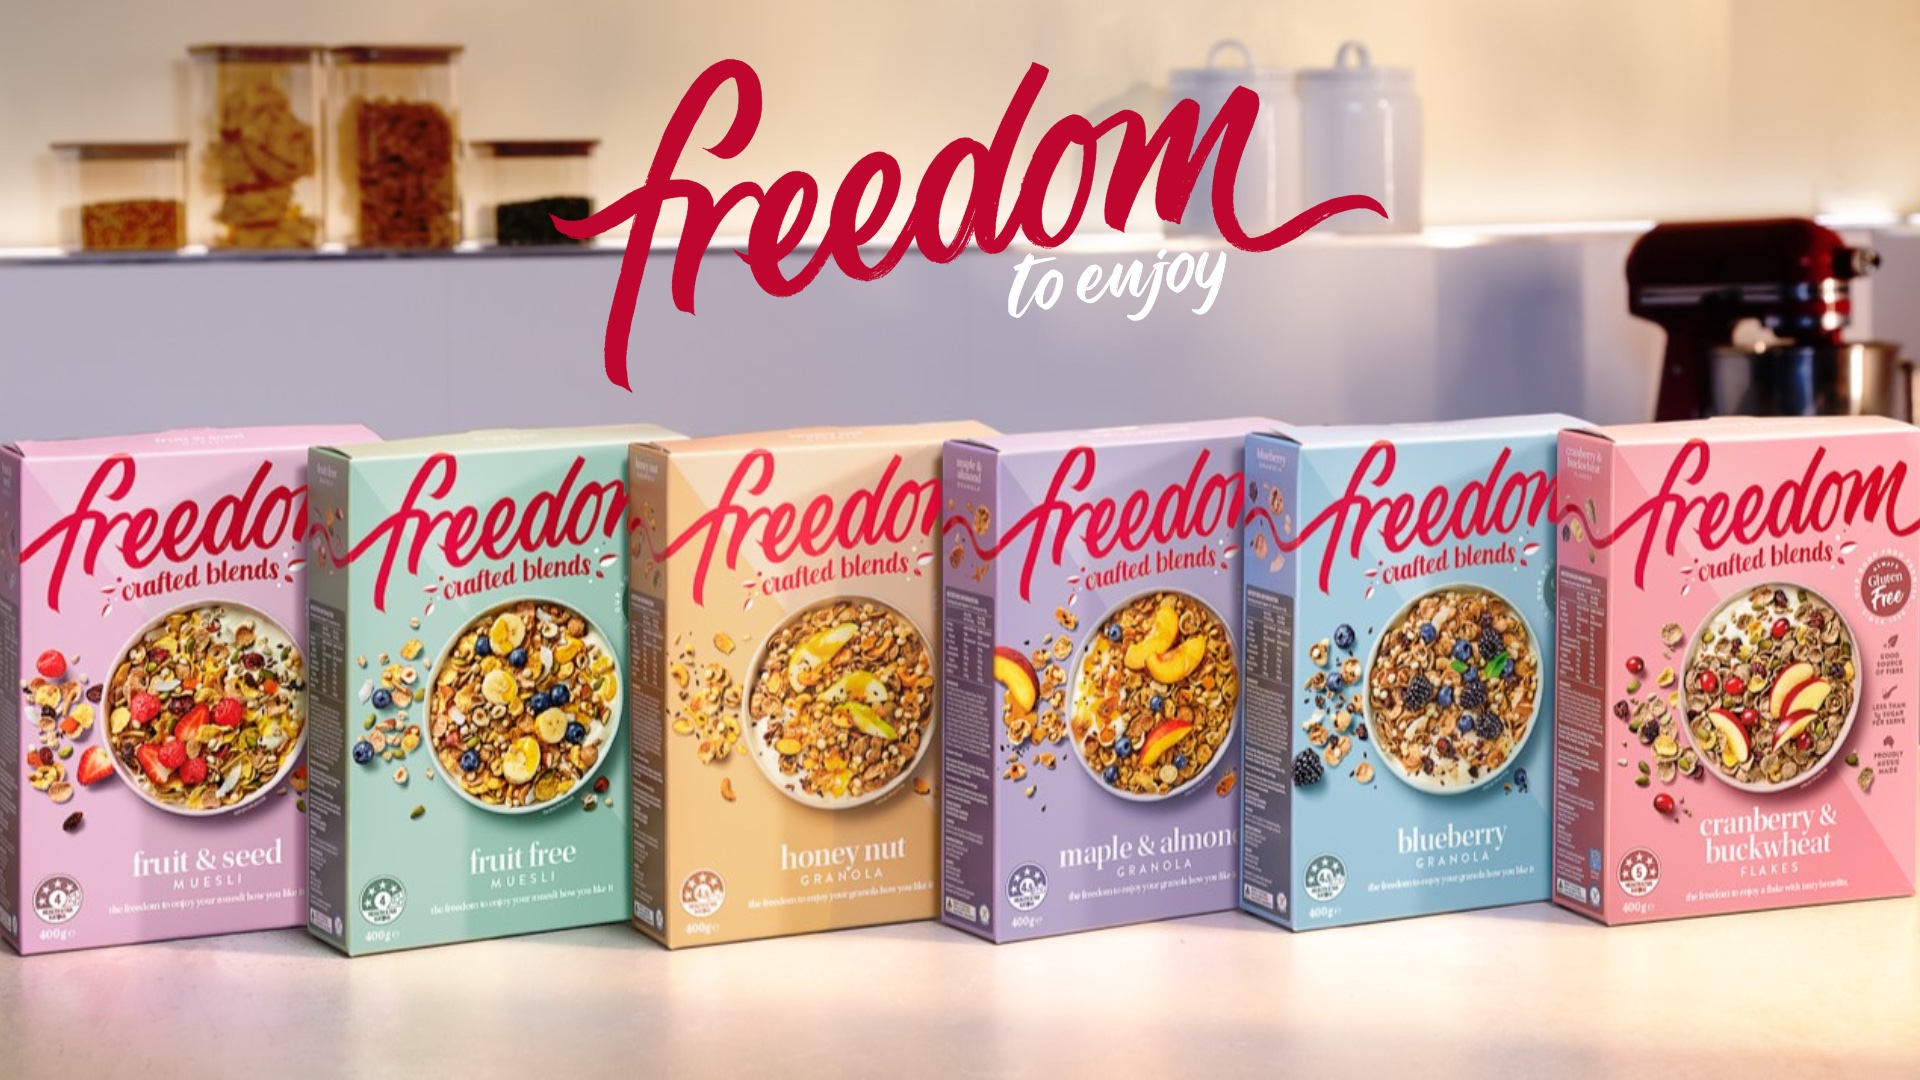 Gluten-free new products alert: Freedom breakfast cereals Crafted Blends. Image of colourful boxes of Freedom breakfast cereals lined up on a kitchen bench.